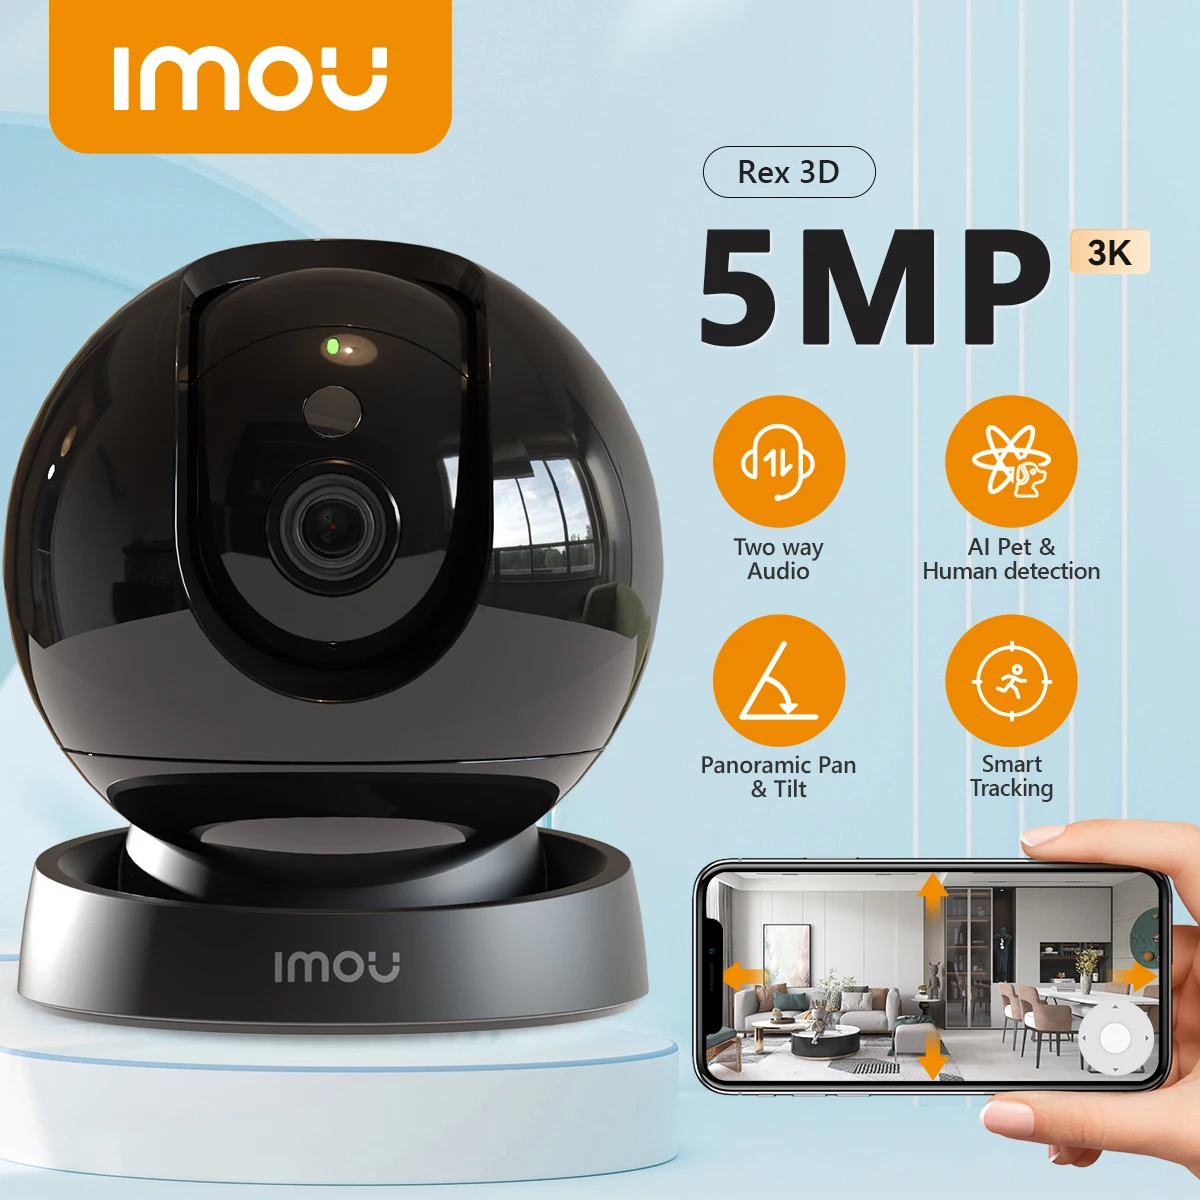 

IMOU Rex 3D 5MP Indoor Wifi PTZ Security Camera Human Pet Detection AI Smart Tracking Two Way Talk Night Vision Baby Monitor